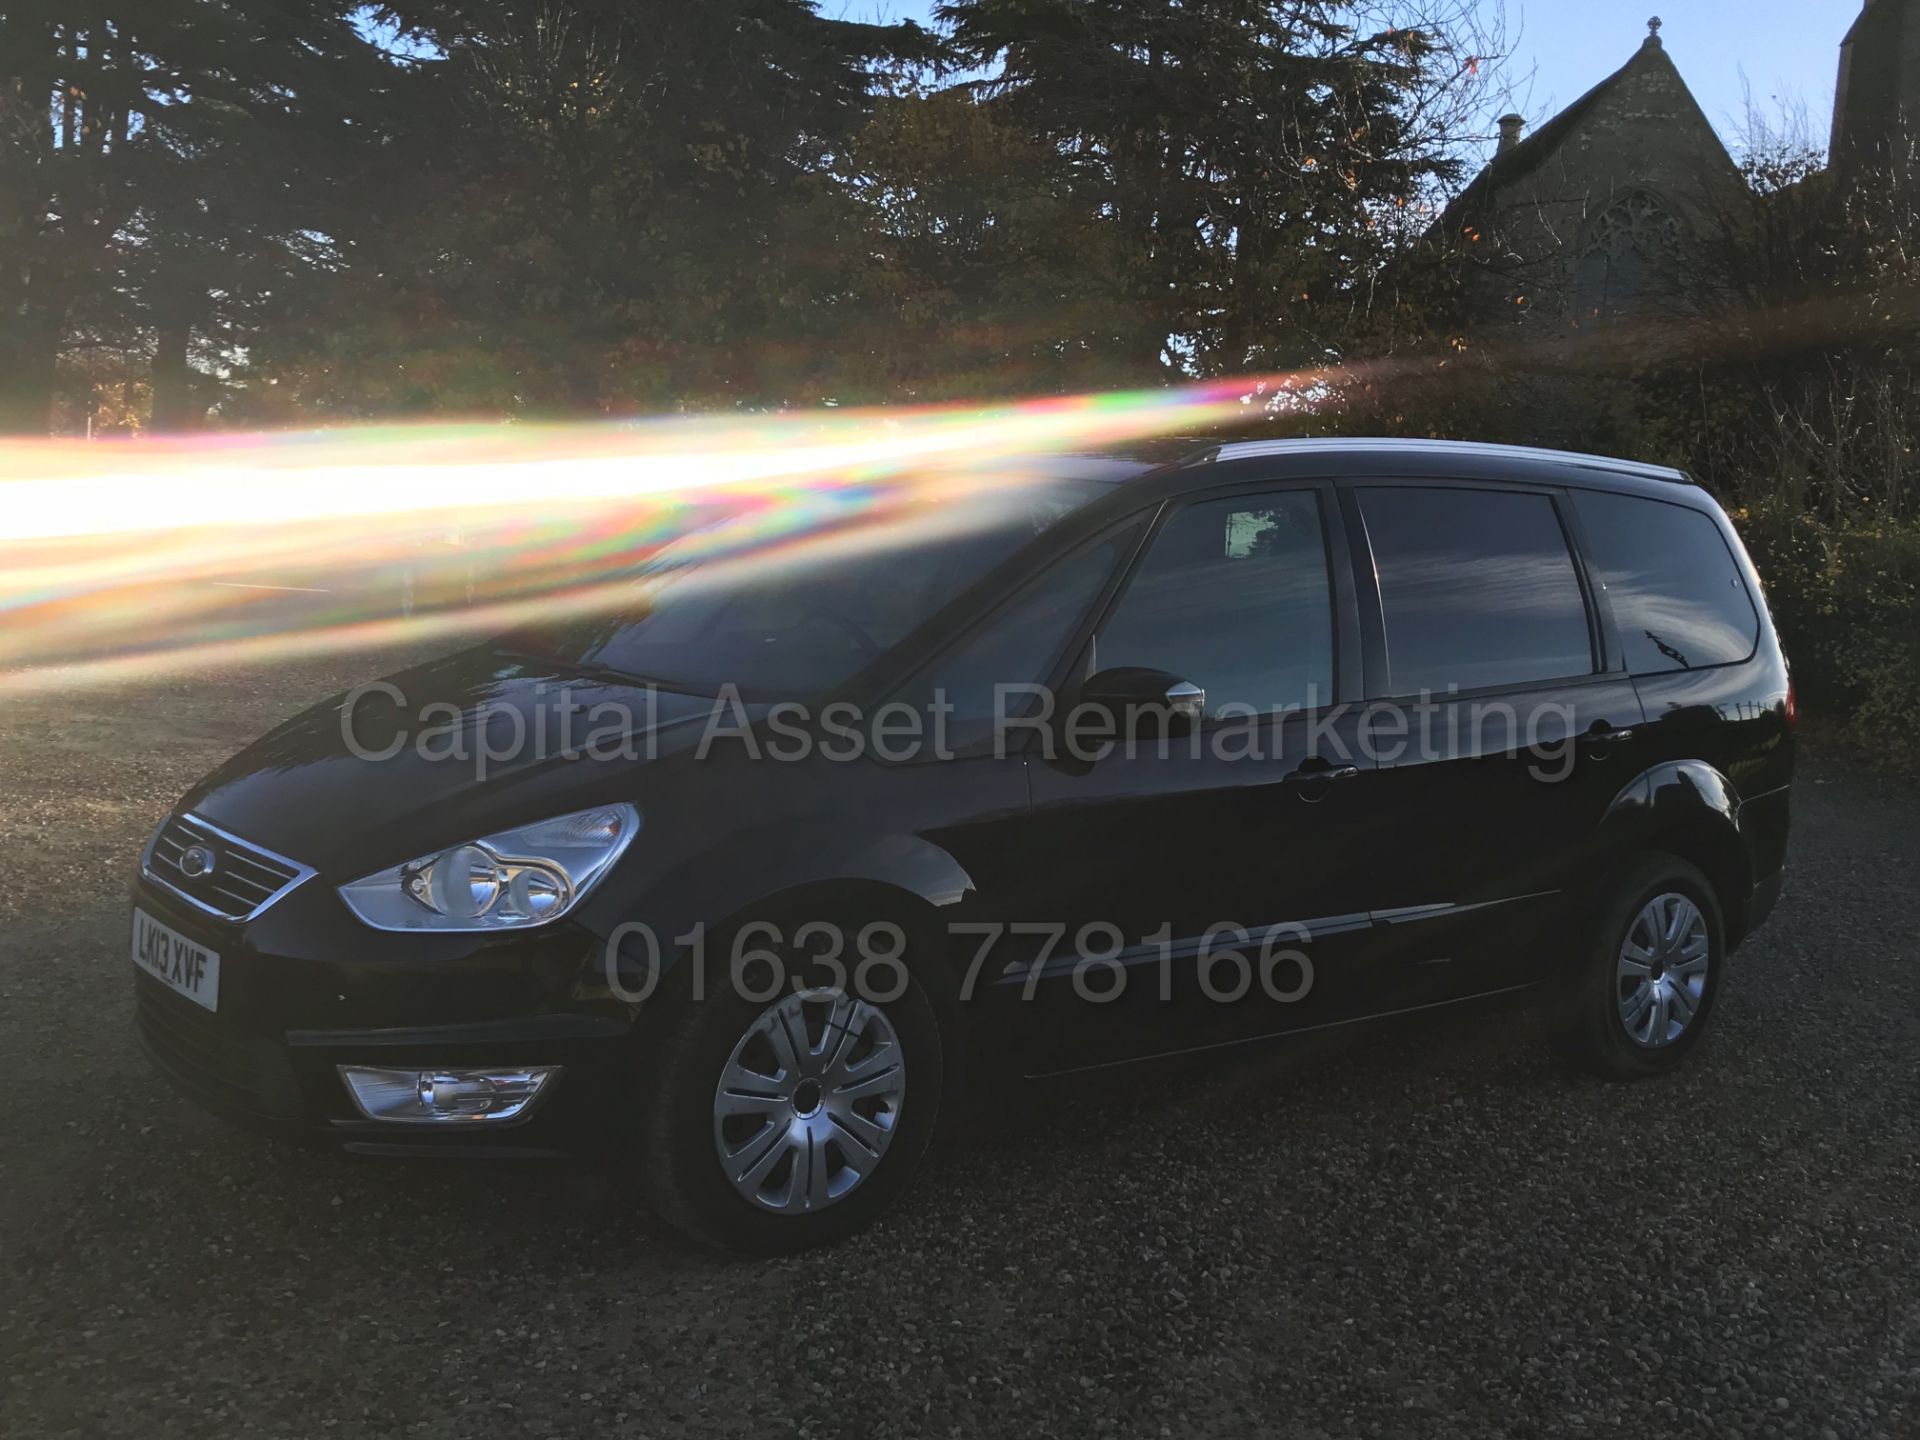 (On Sale) FORD GALAXY 'ZETEC' 7 SEATER MPV (2013) '2.0 TDCI -140 BHP' (1 OWNER) *FULL HISTORY* - Image 7 of 29